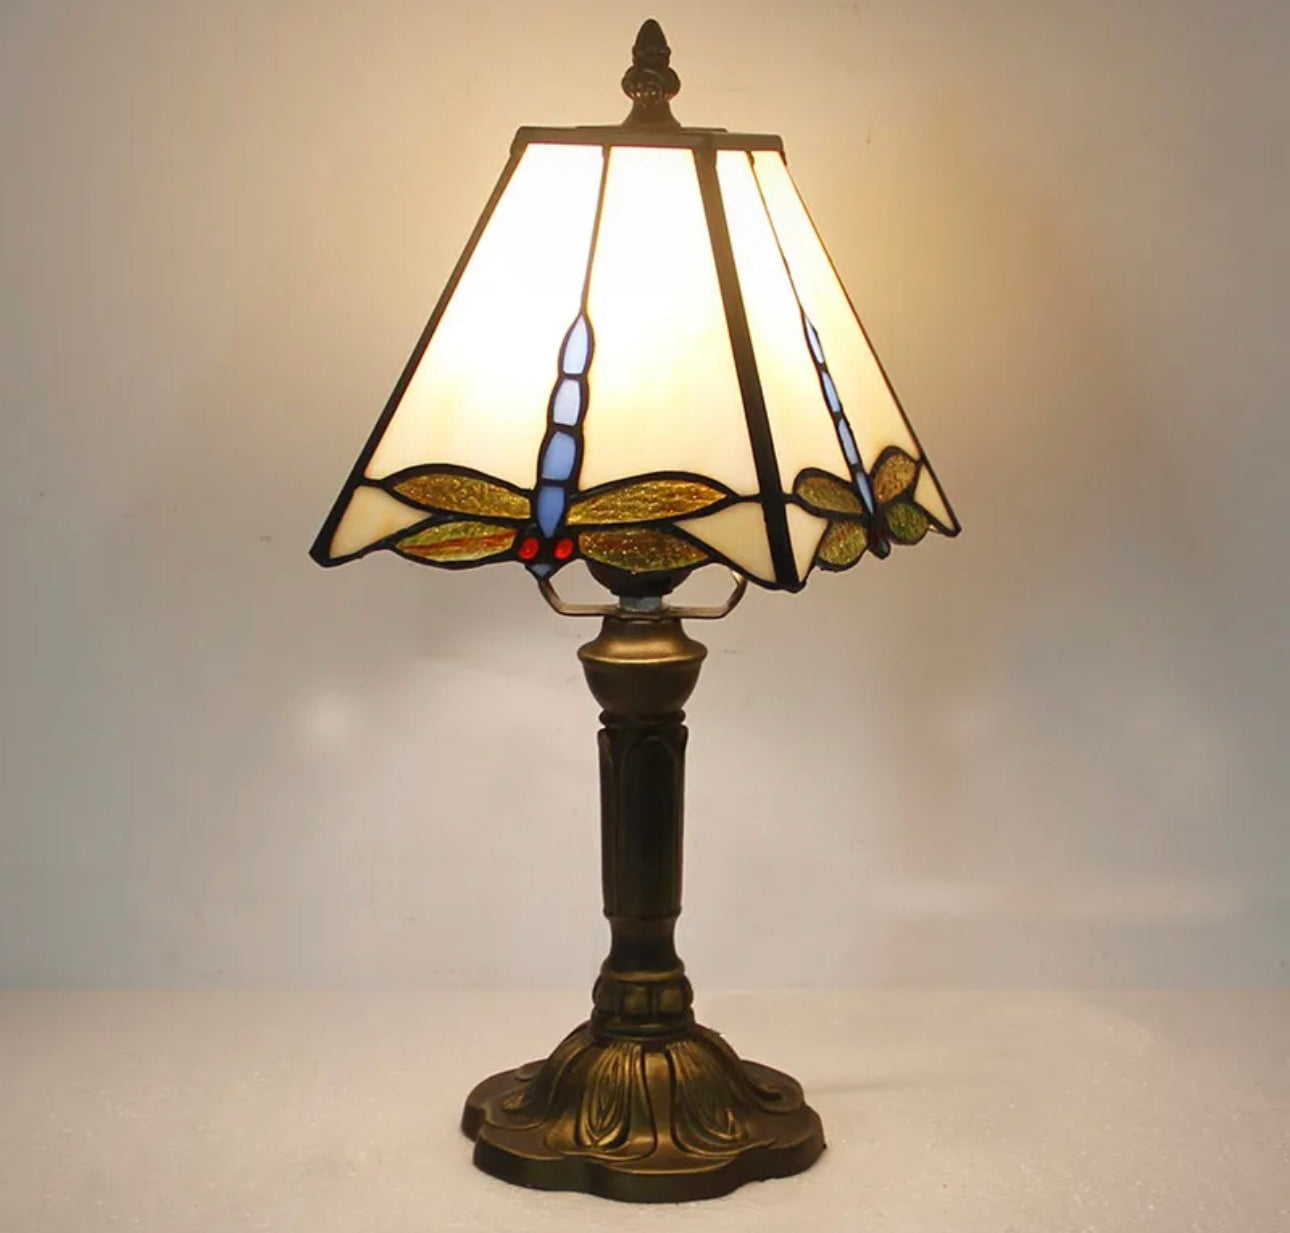 Antique Tiffany Table Lamp With Stained Glass Shade - Lamps